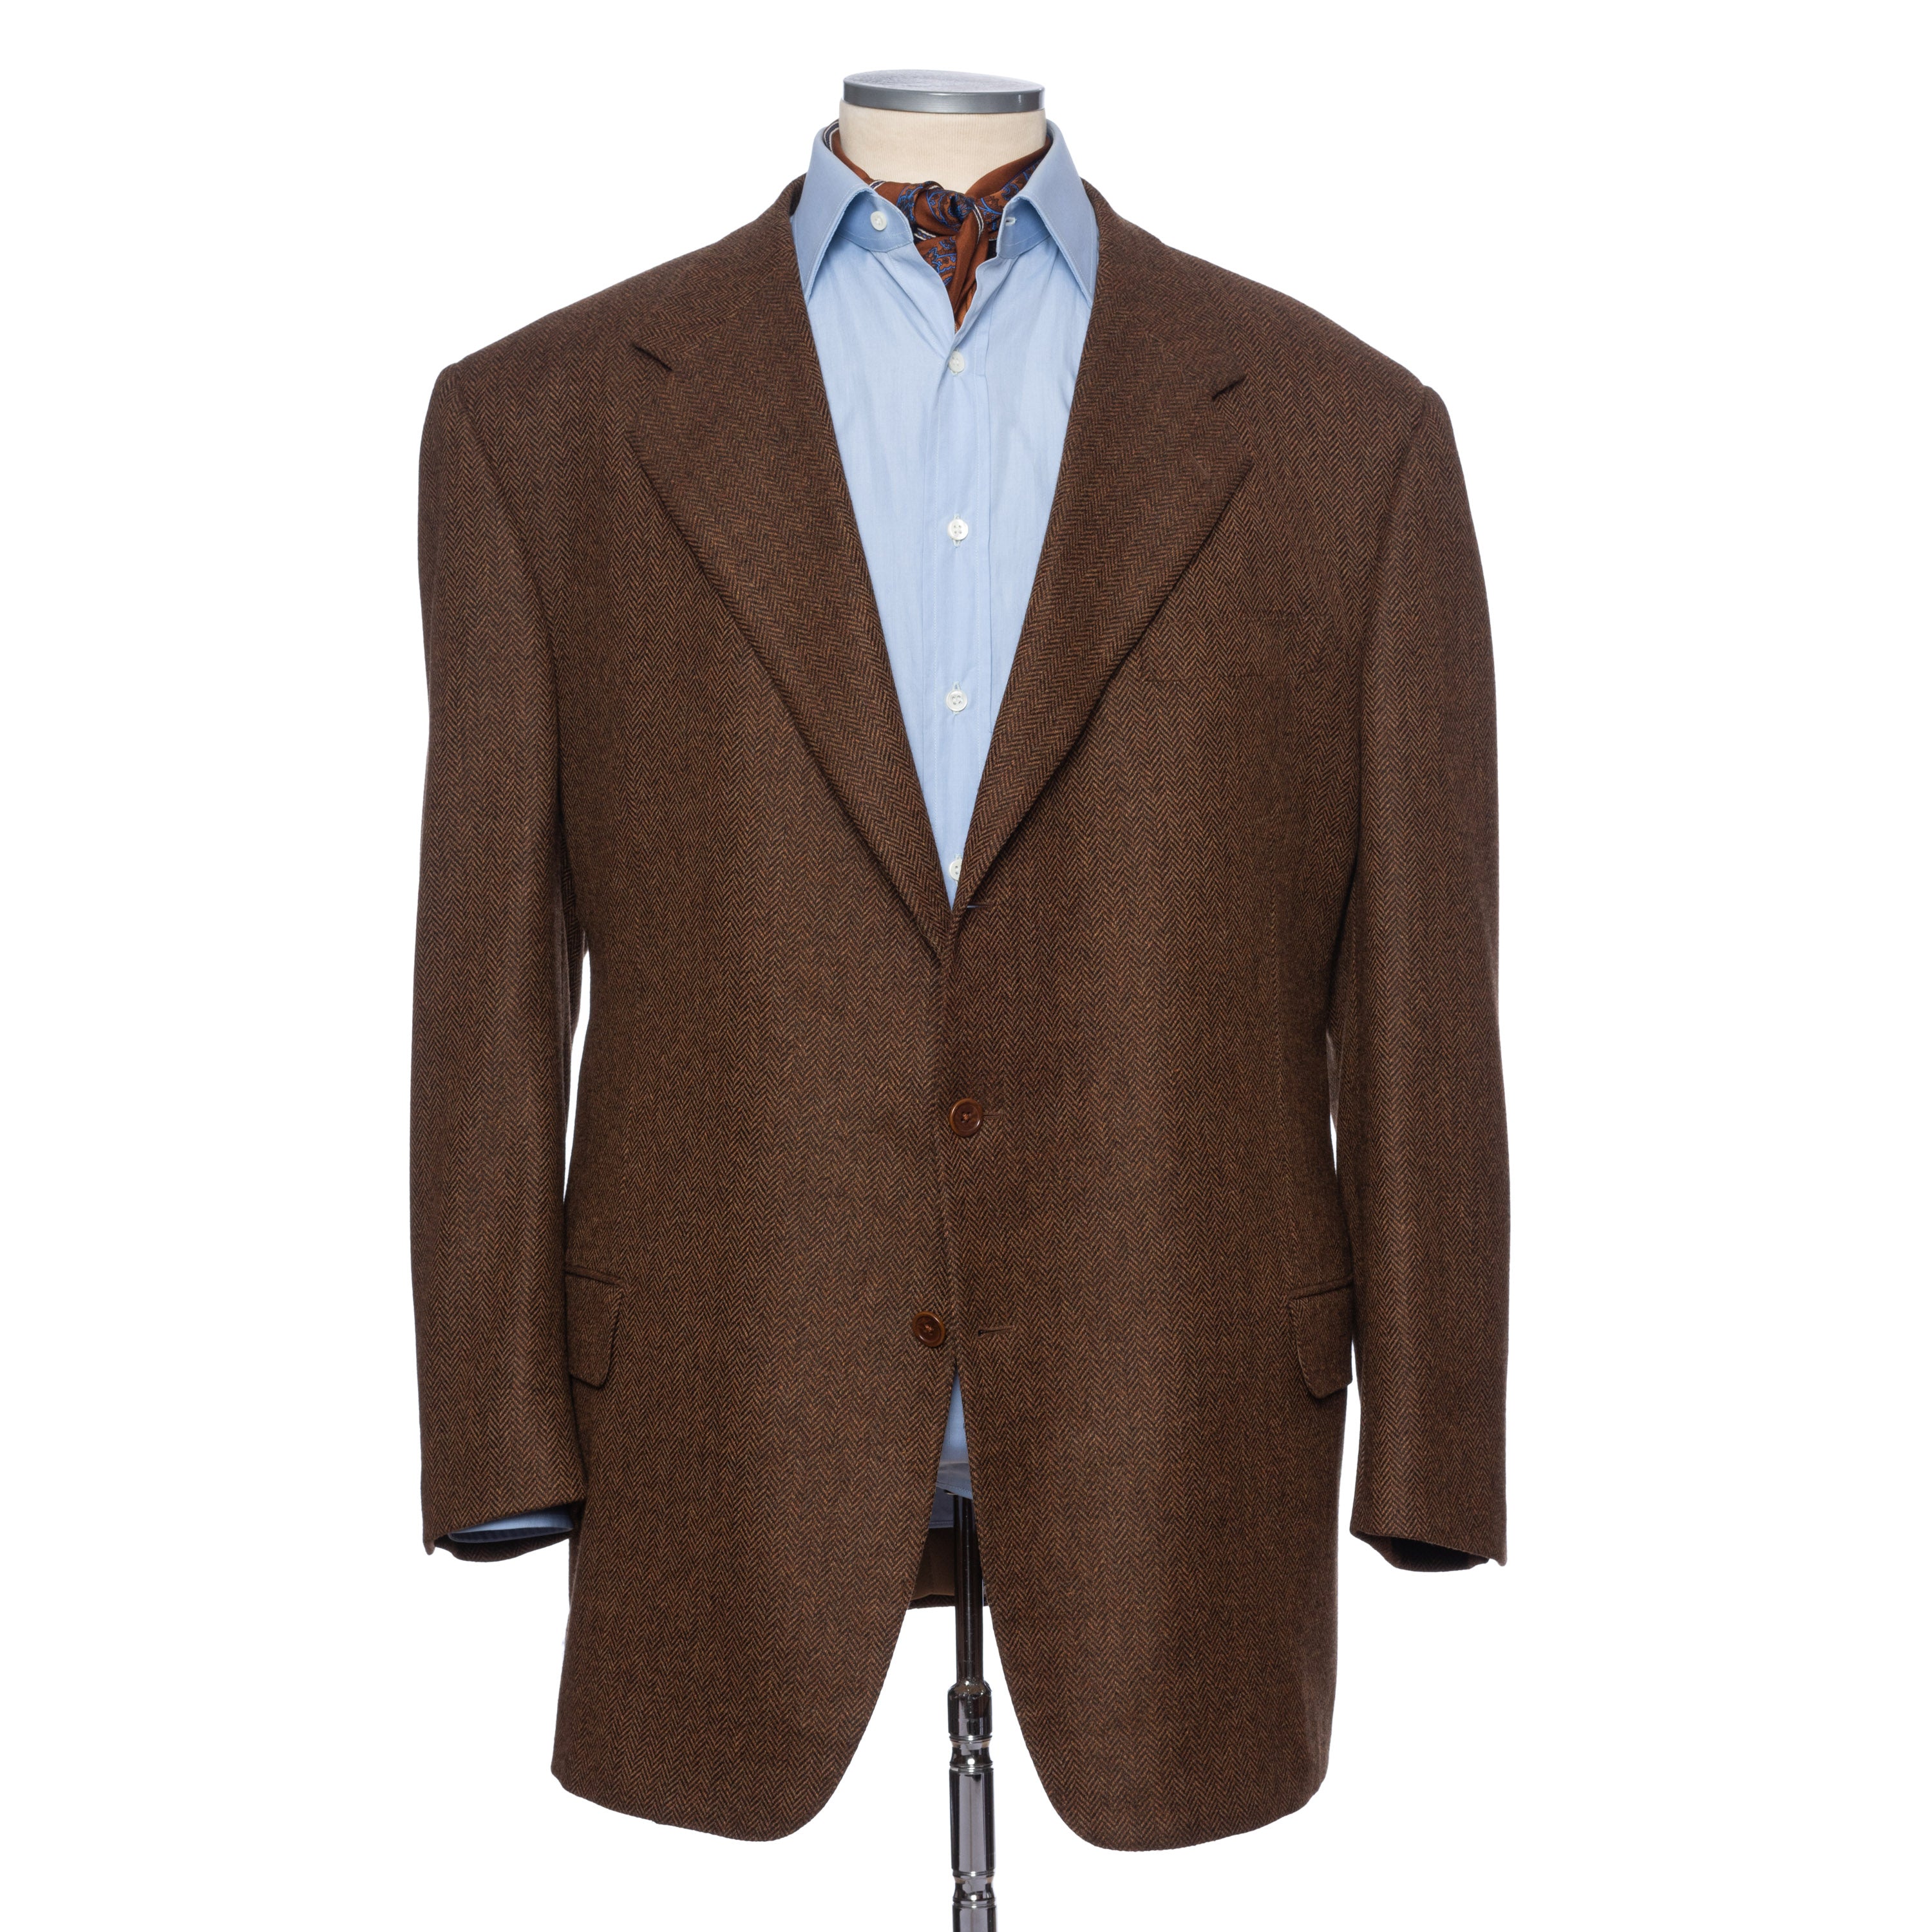 CASTANGIA 1850 Brown Wool-Cashmere Jacket EU 70 NEW US 60 Big and